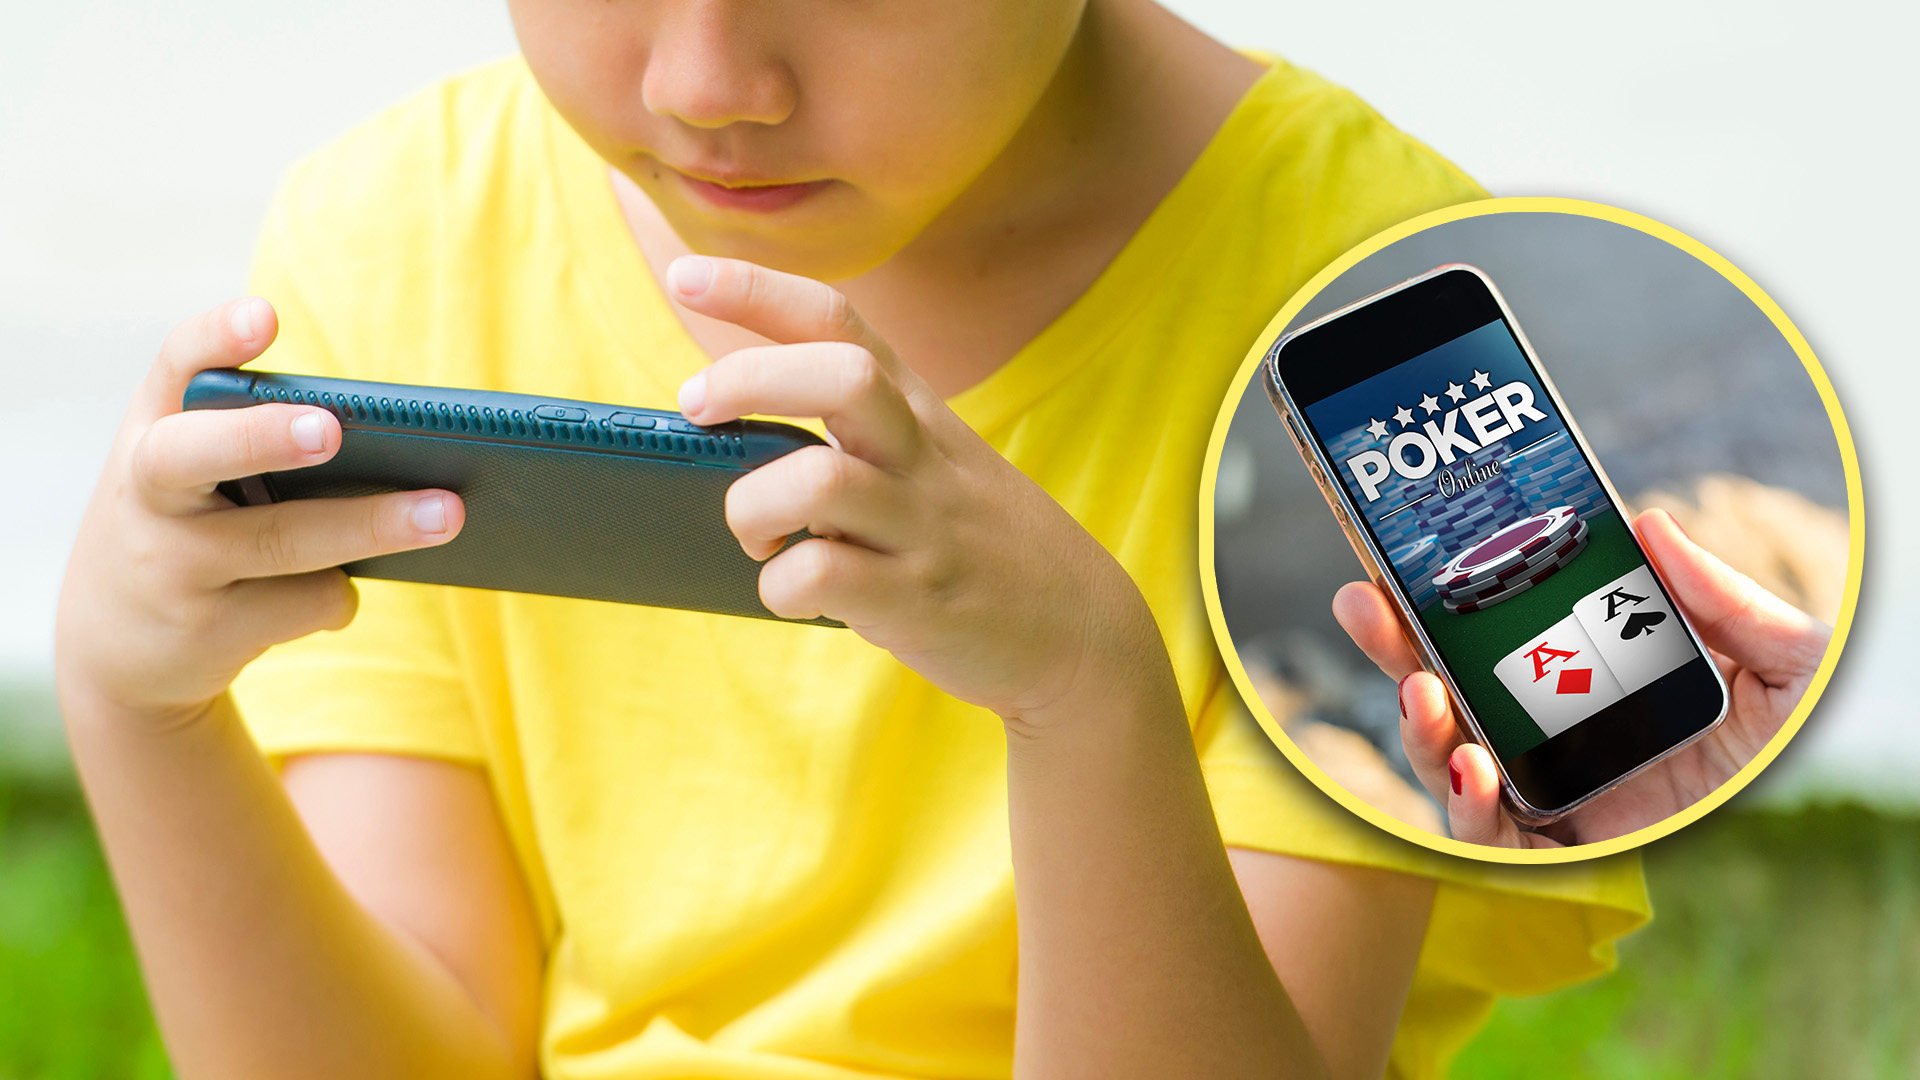 An online gambling game addicted teenager in China has wiped out his father’s life savings of US$28,000 by betting on his phone, in a story that has turned the spotlight on a wider societal problem. Photo: SCMP composite/Shutterstock